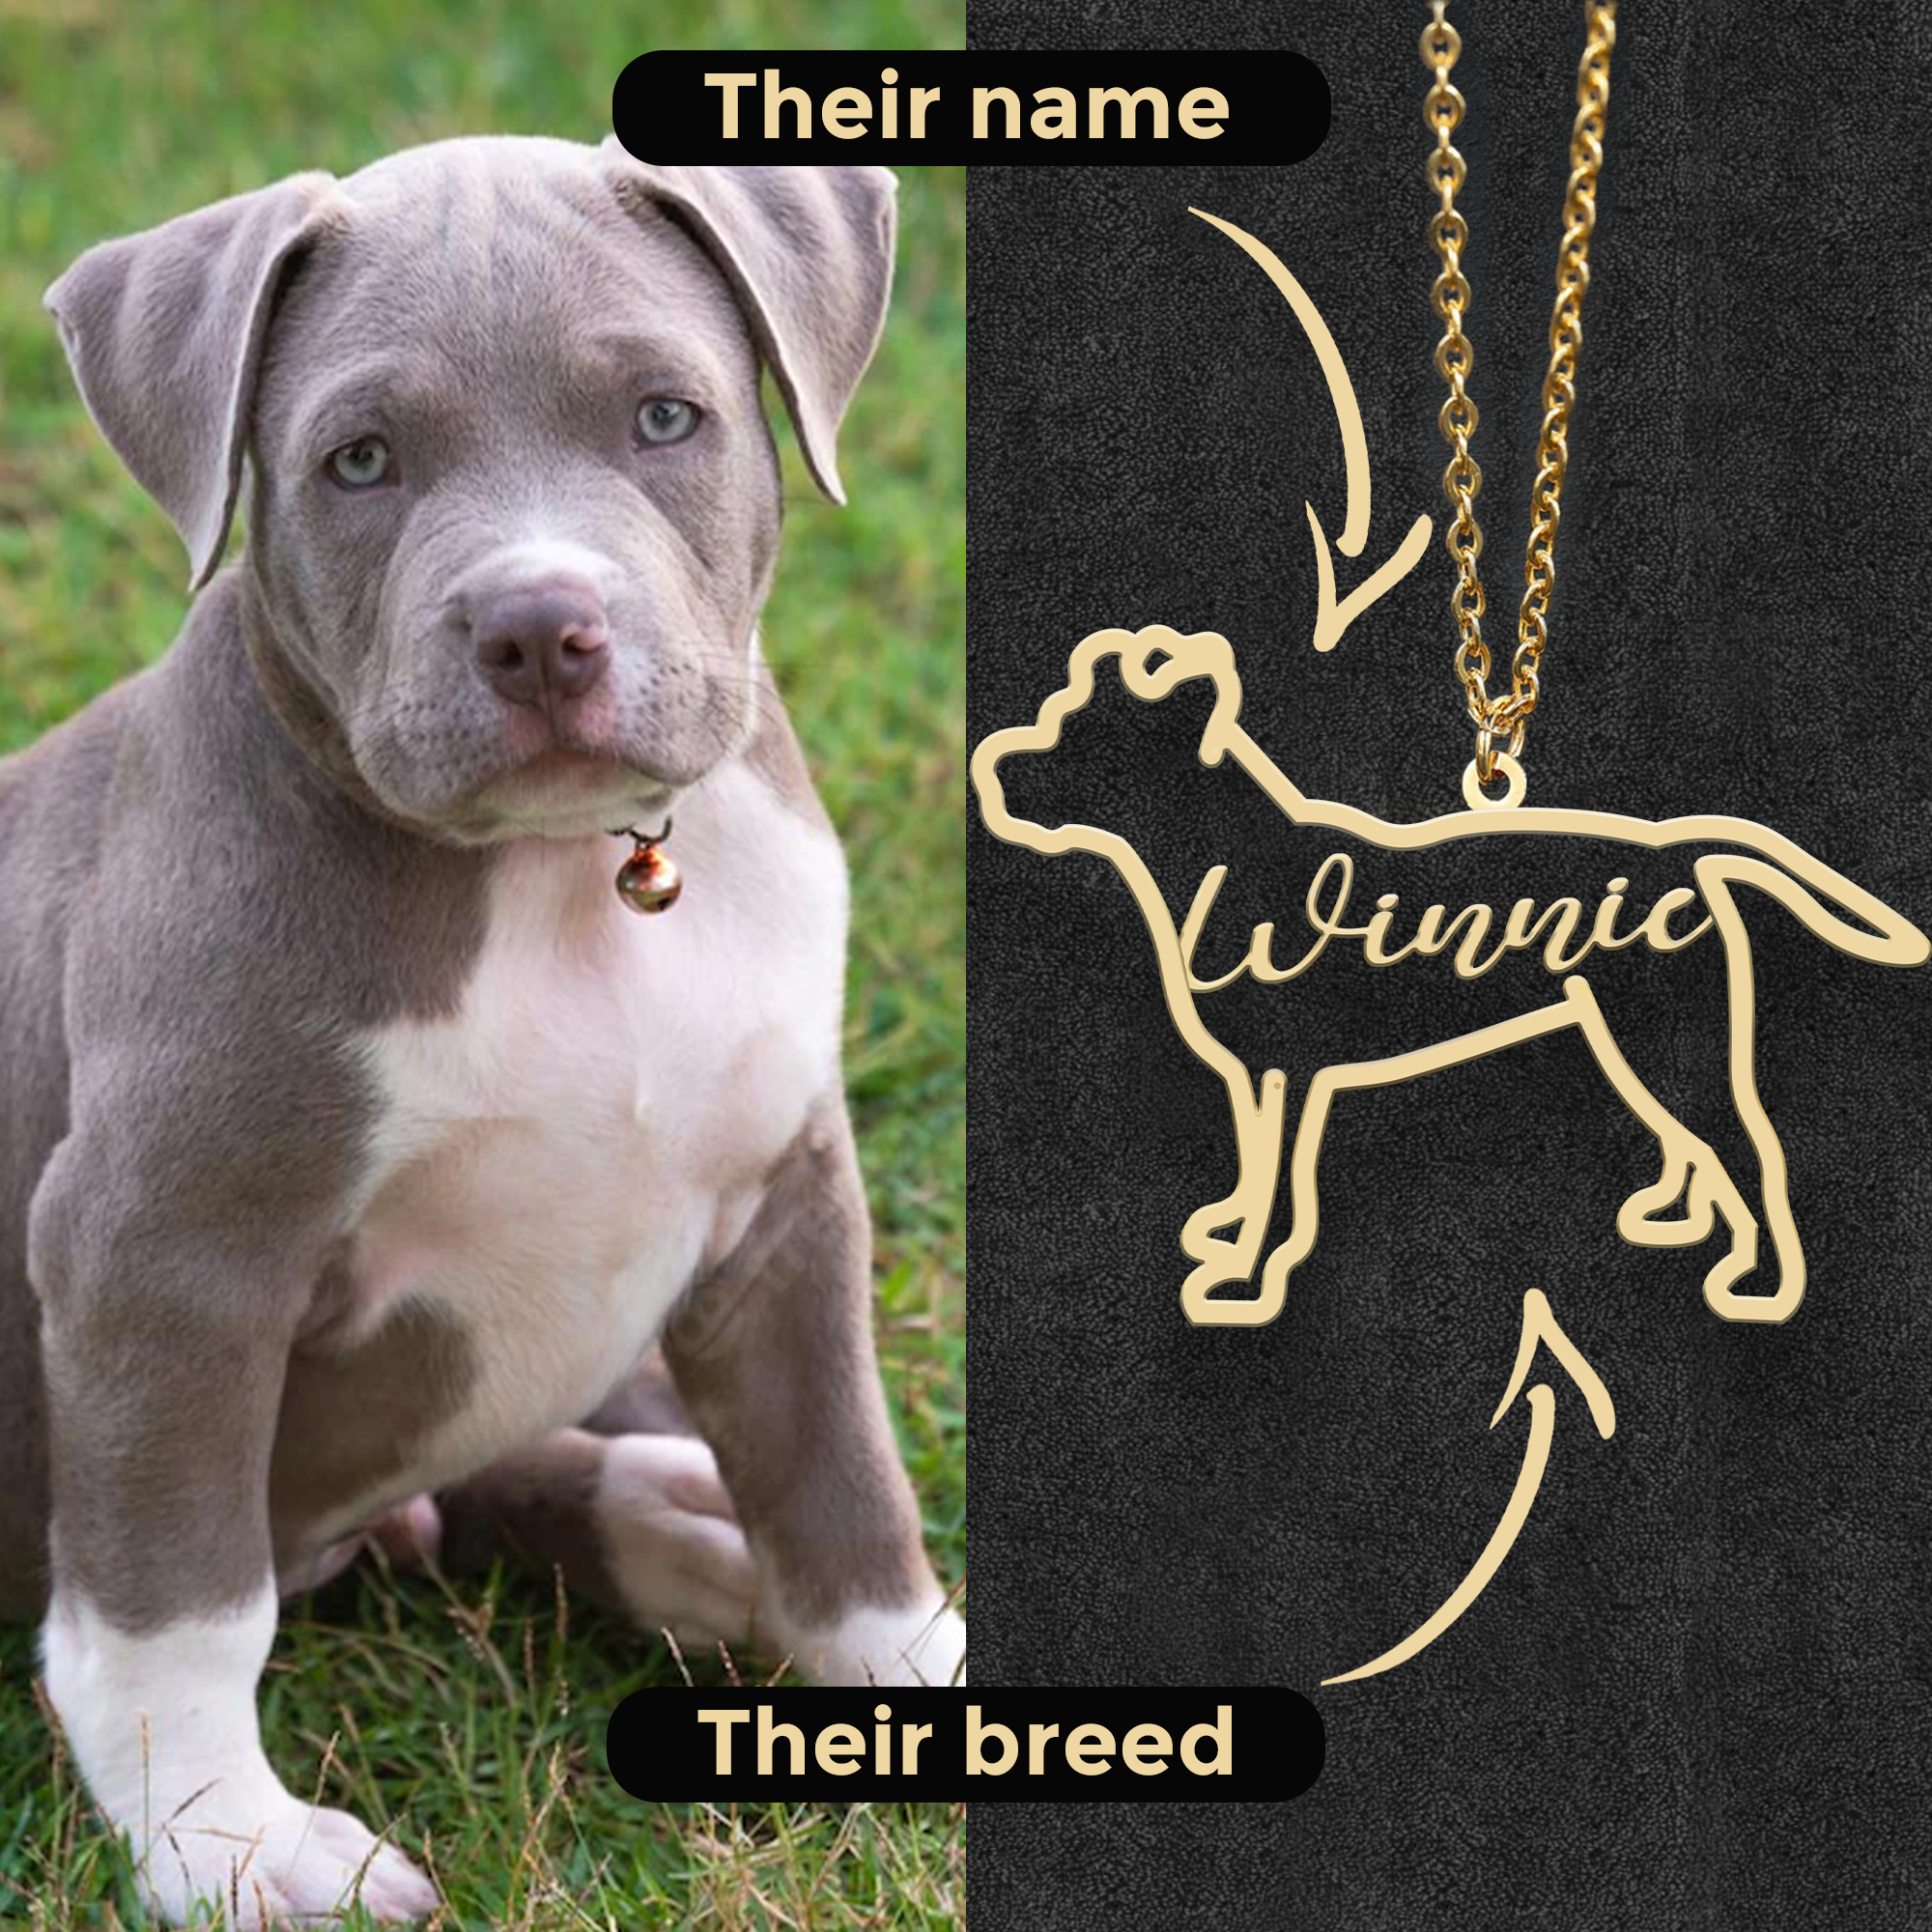 Personalized necklace with your dog's breed and name